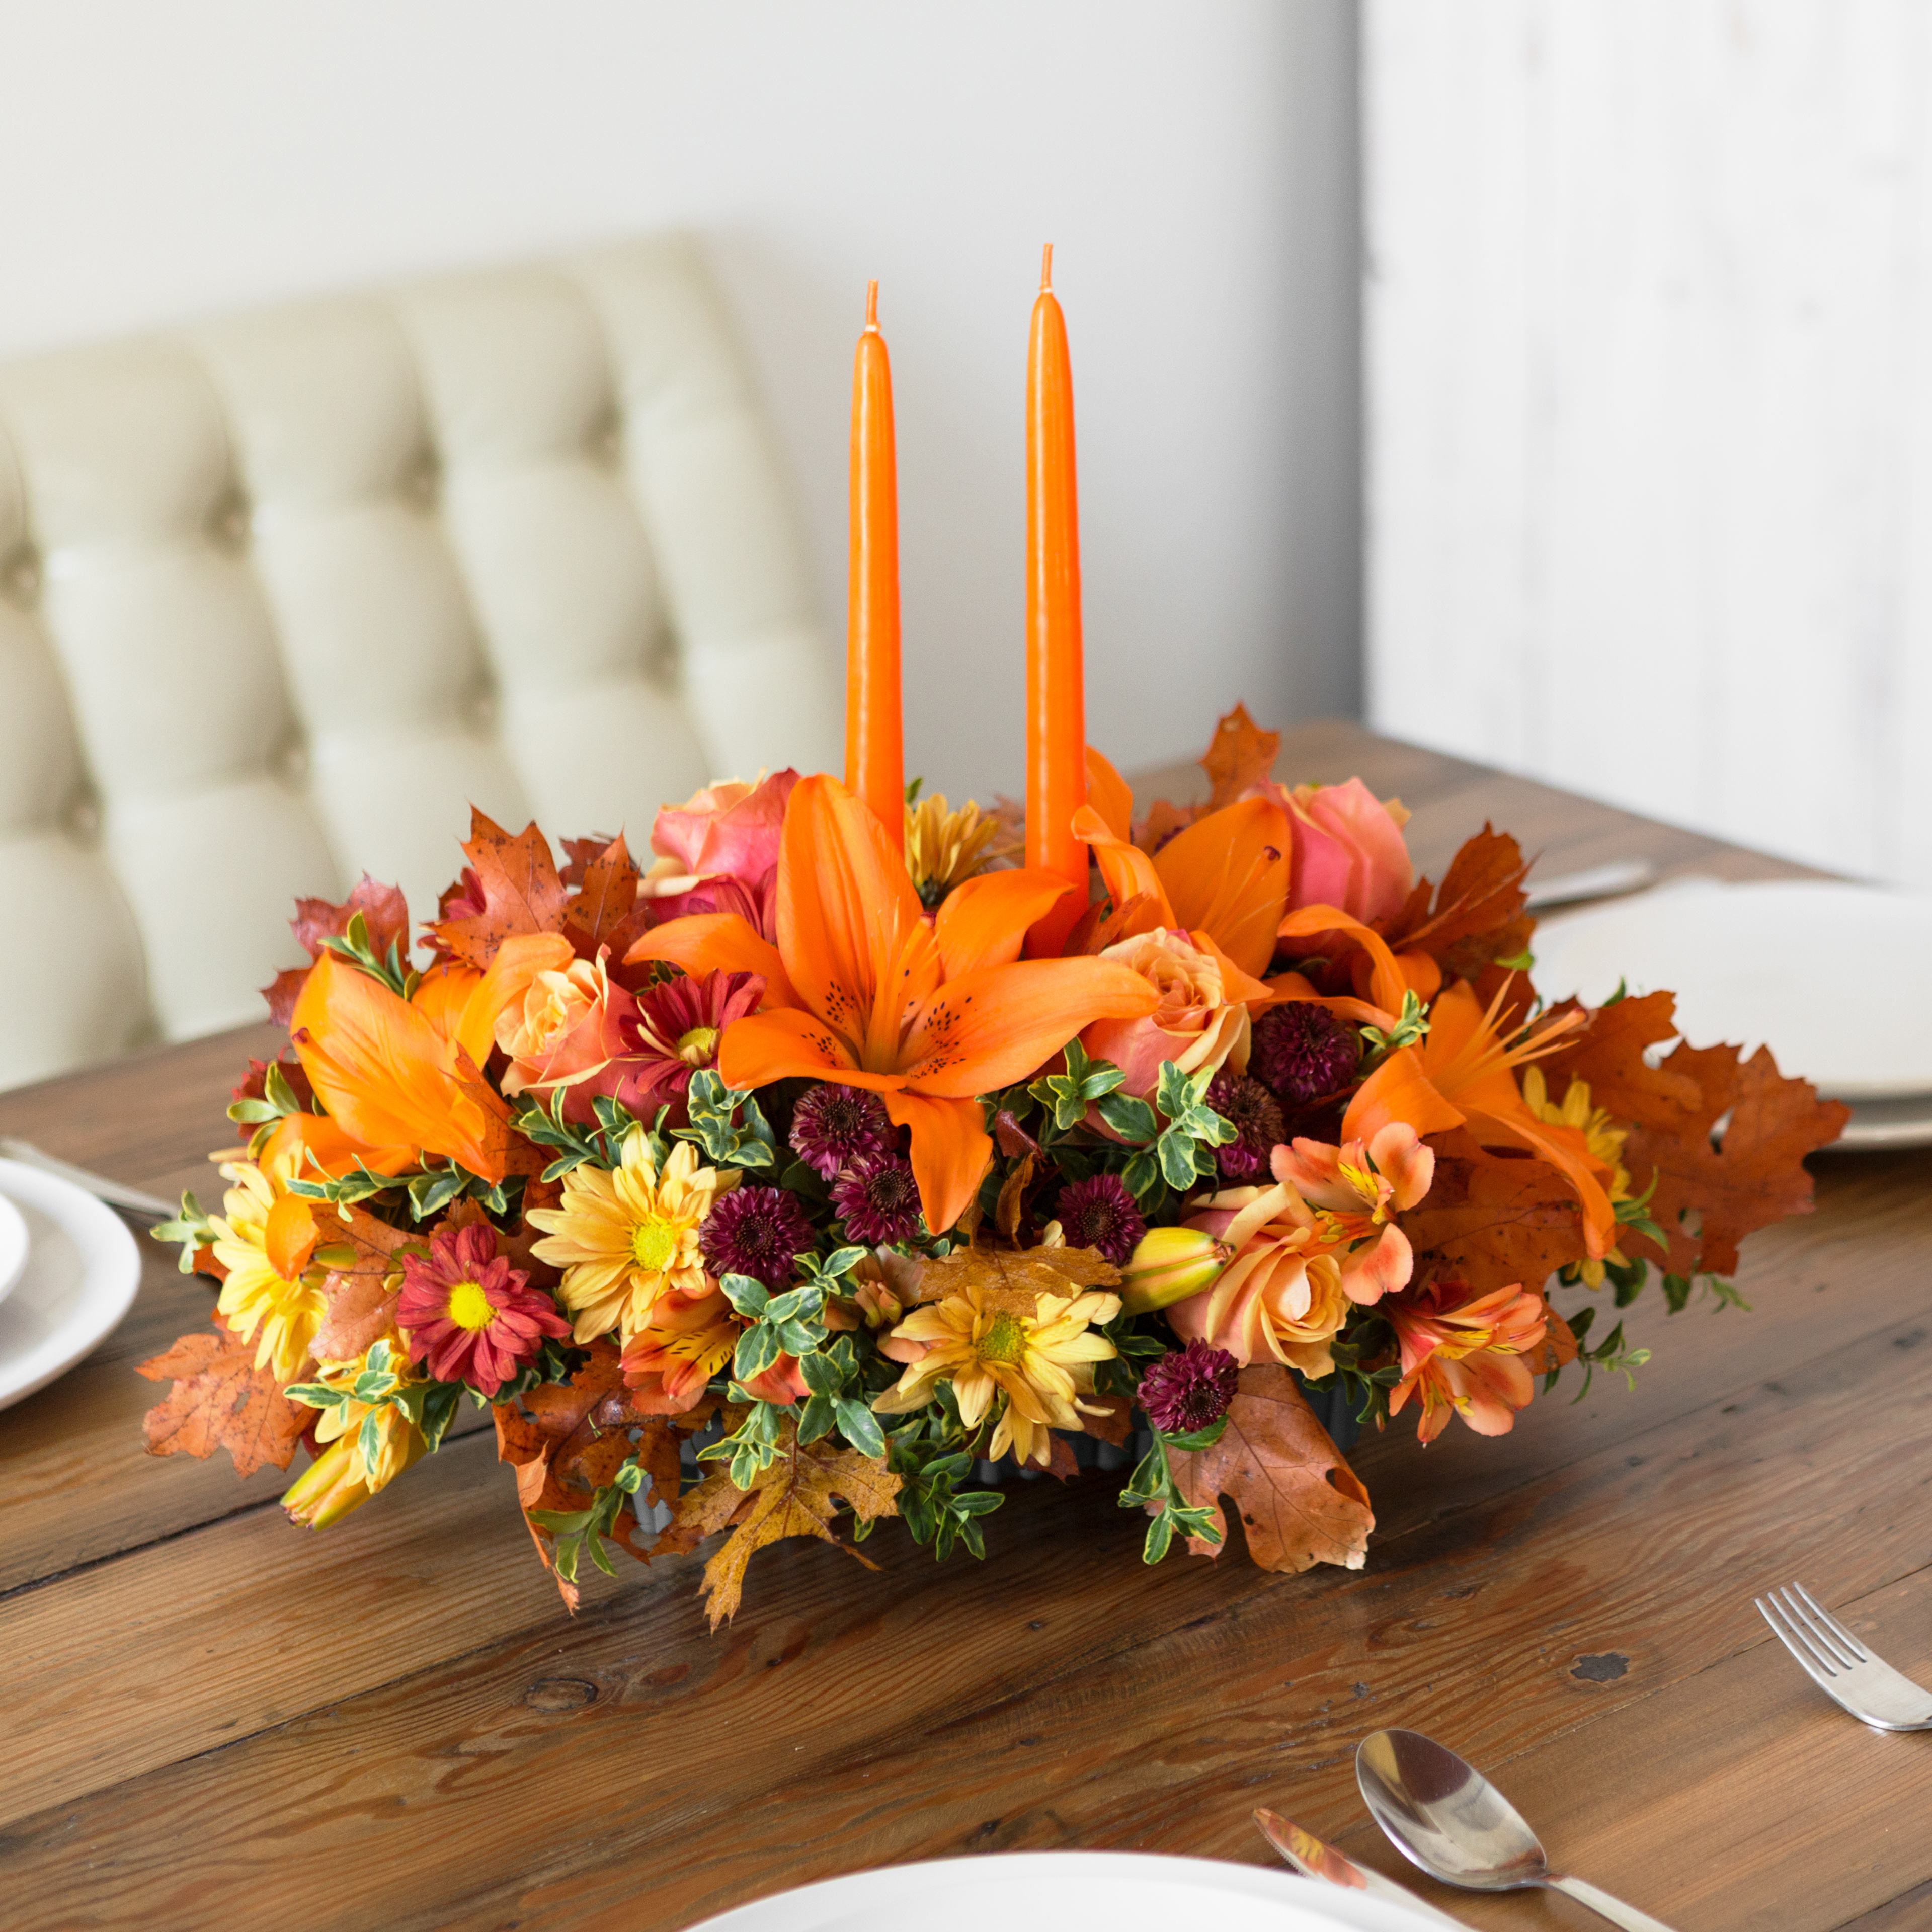 Orange lilies, purple mims, orange roses, and more in thanksgiving centerpiece with orange candles